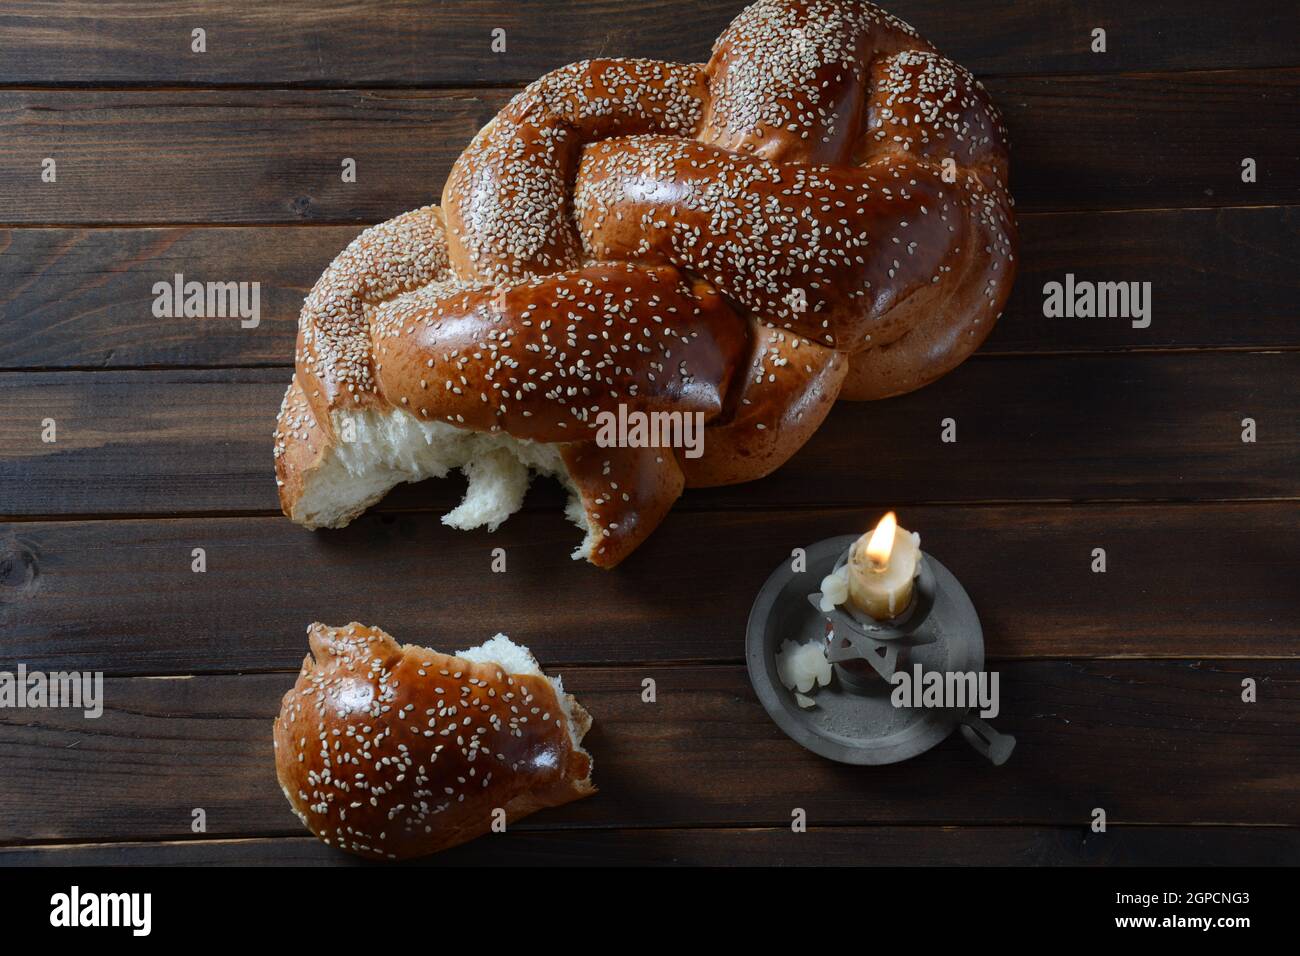 https://c8.alamy.com/comp/2GPCNG3/homemade-challah-bread-with-sesame-seeds-jewish-traditional-bread-for-shabbat-2GPCNG3.jpg